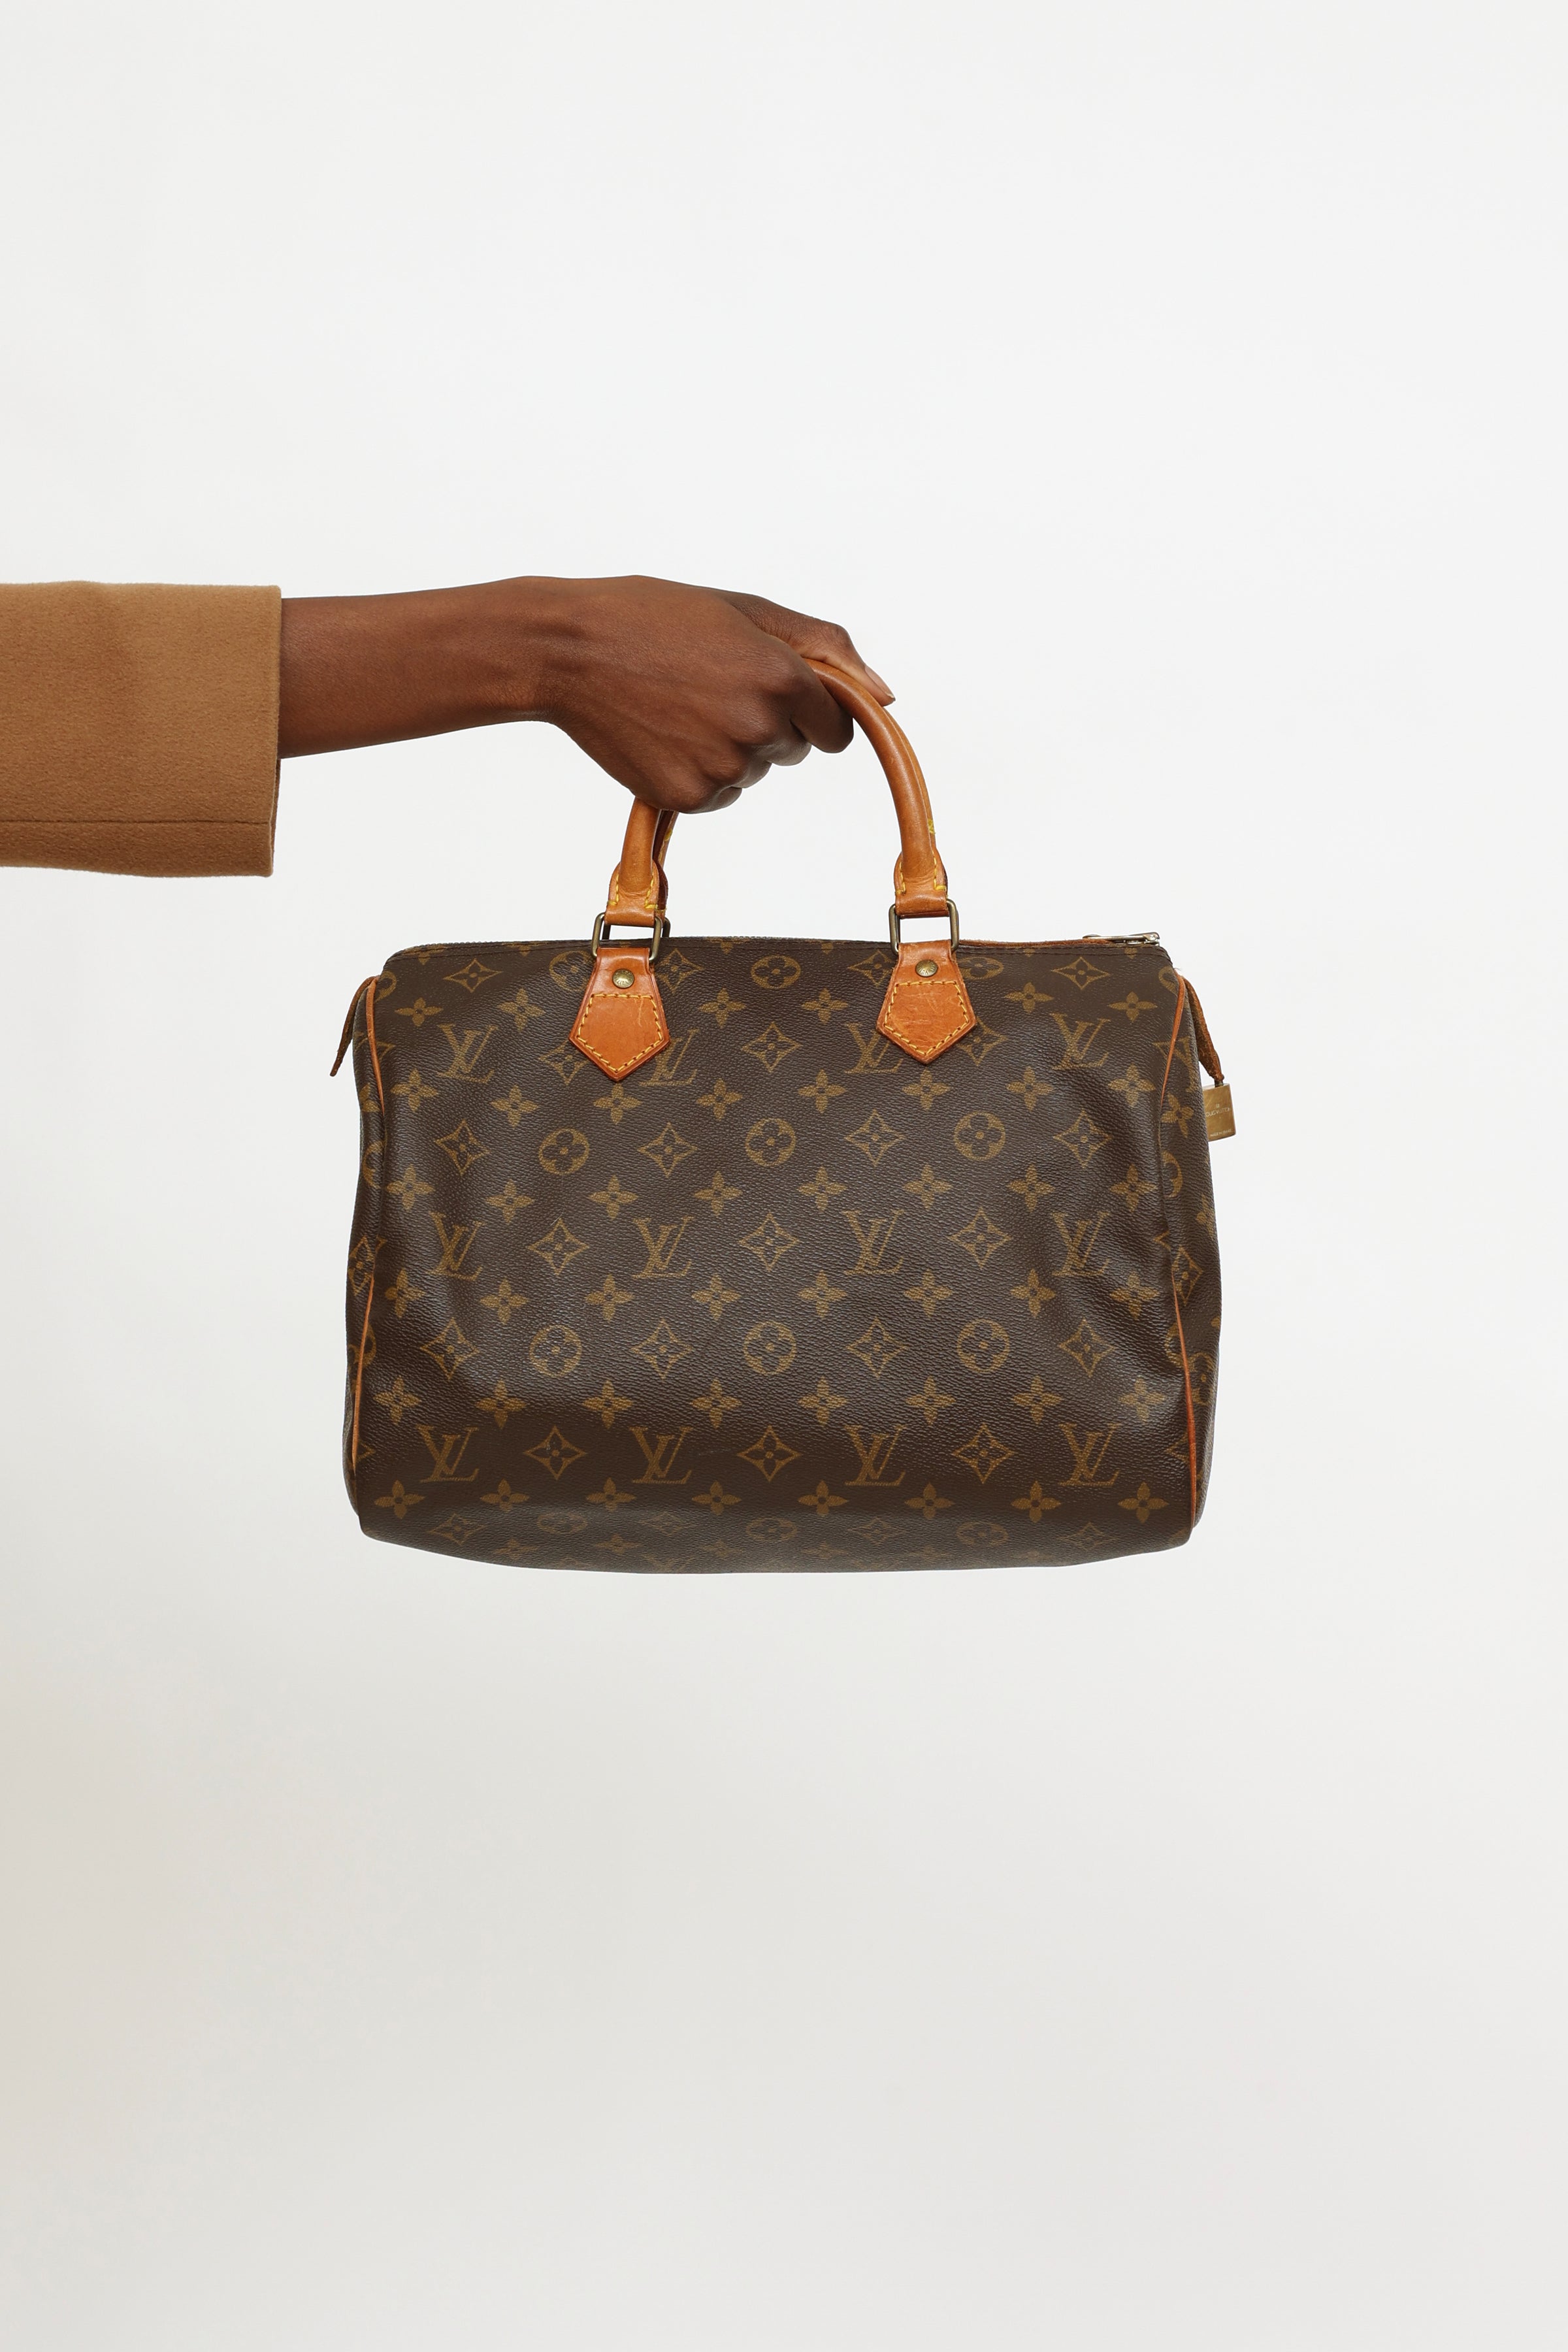 White And Brown Louis Vuitton Bag - 30 For Sale on 1stDibs